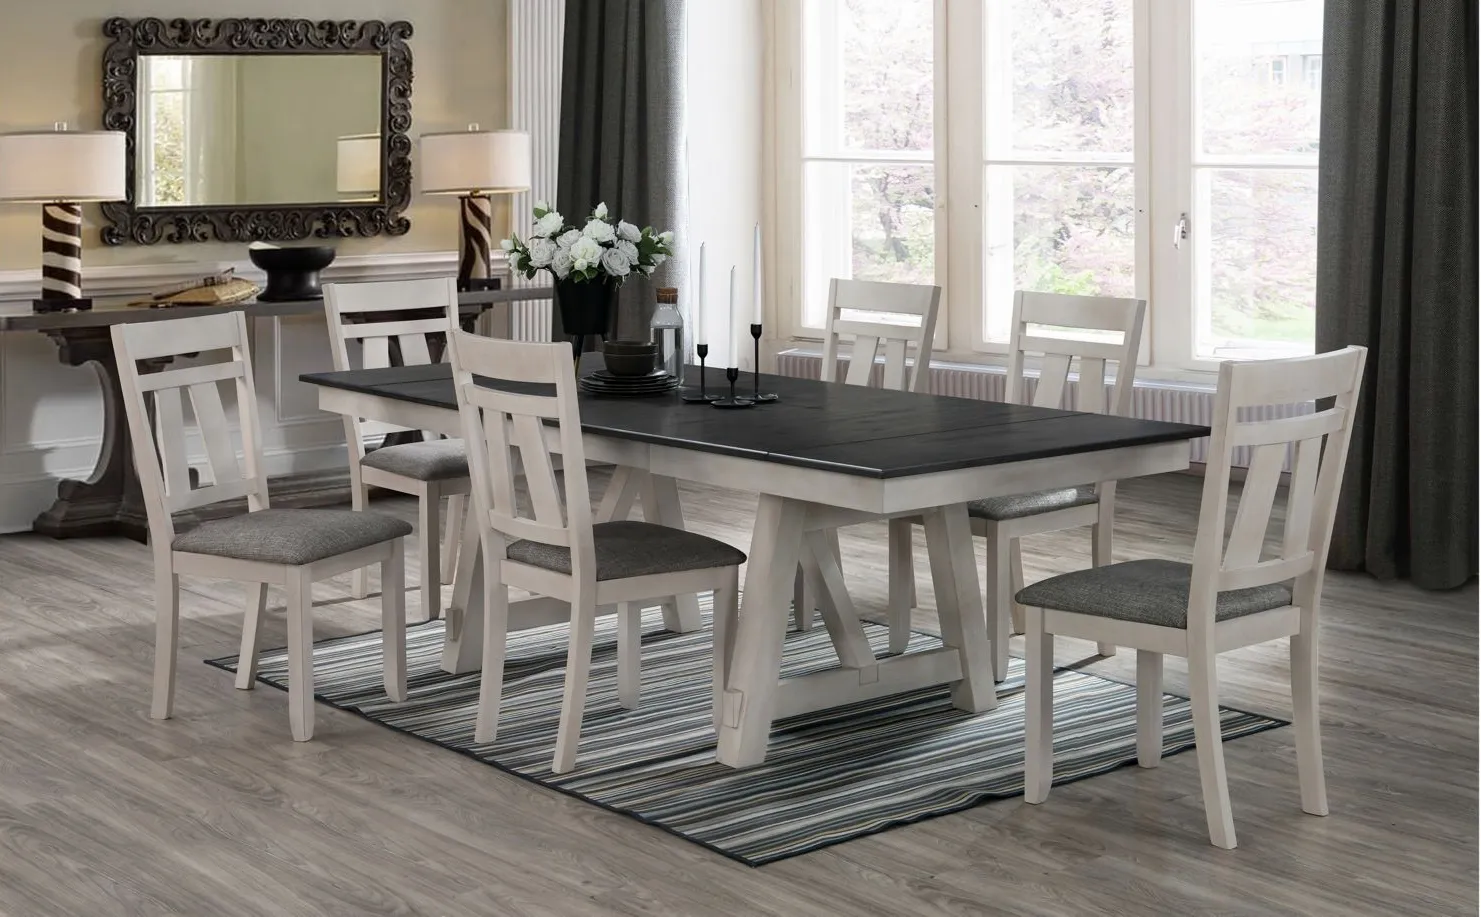 Maribelle 7-pc.Dining Set in Antique White and Gray by Crown Mark